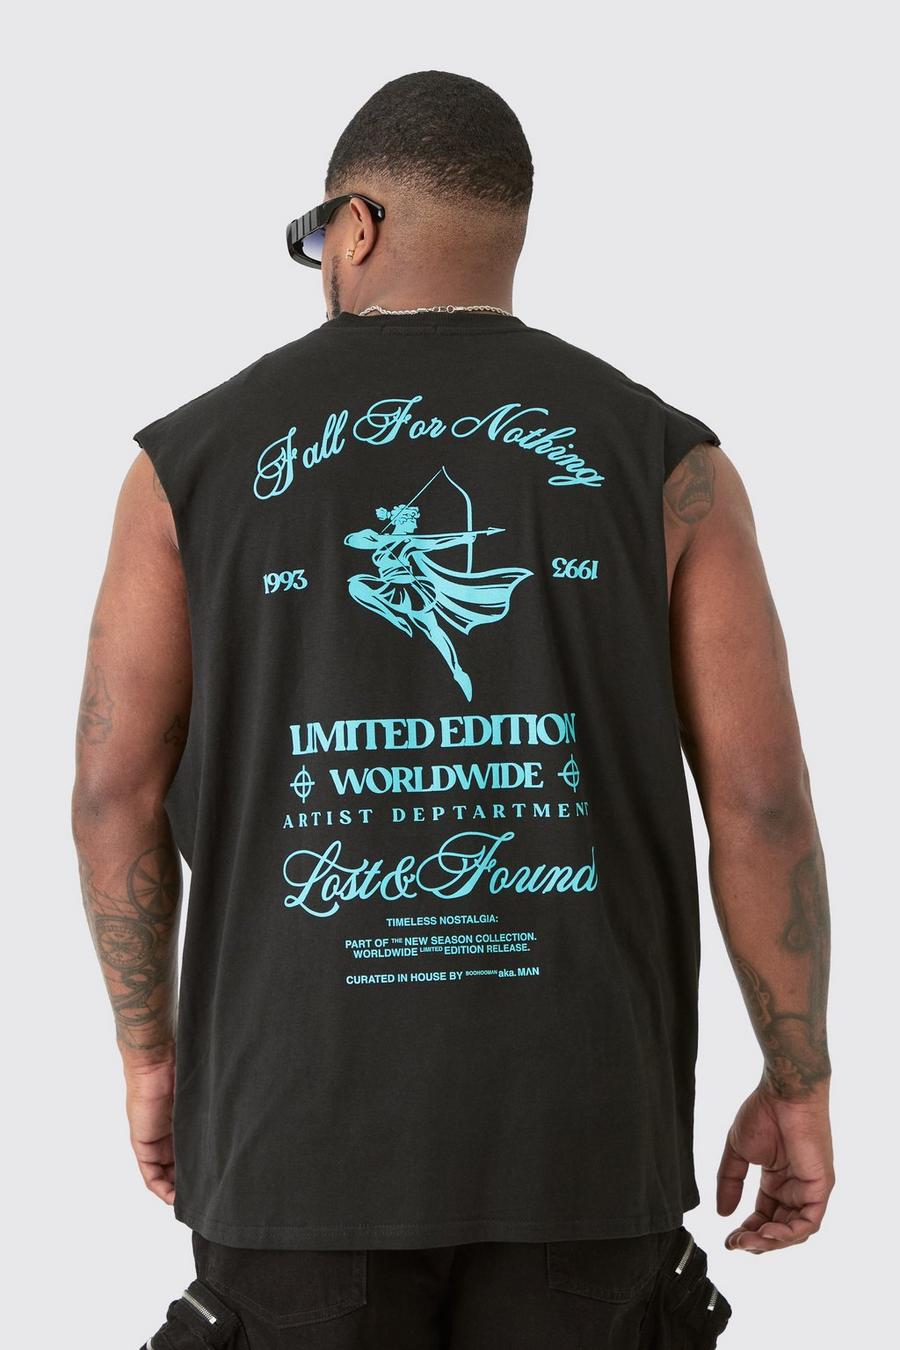 Plus Limited Edition Worldwide Back Print Tank In Black image number 1